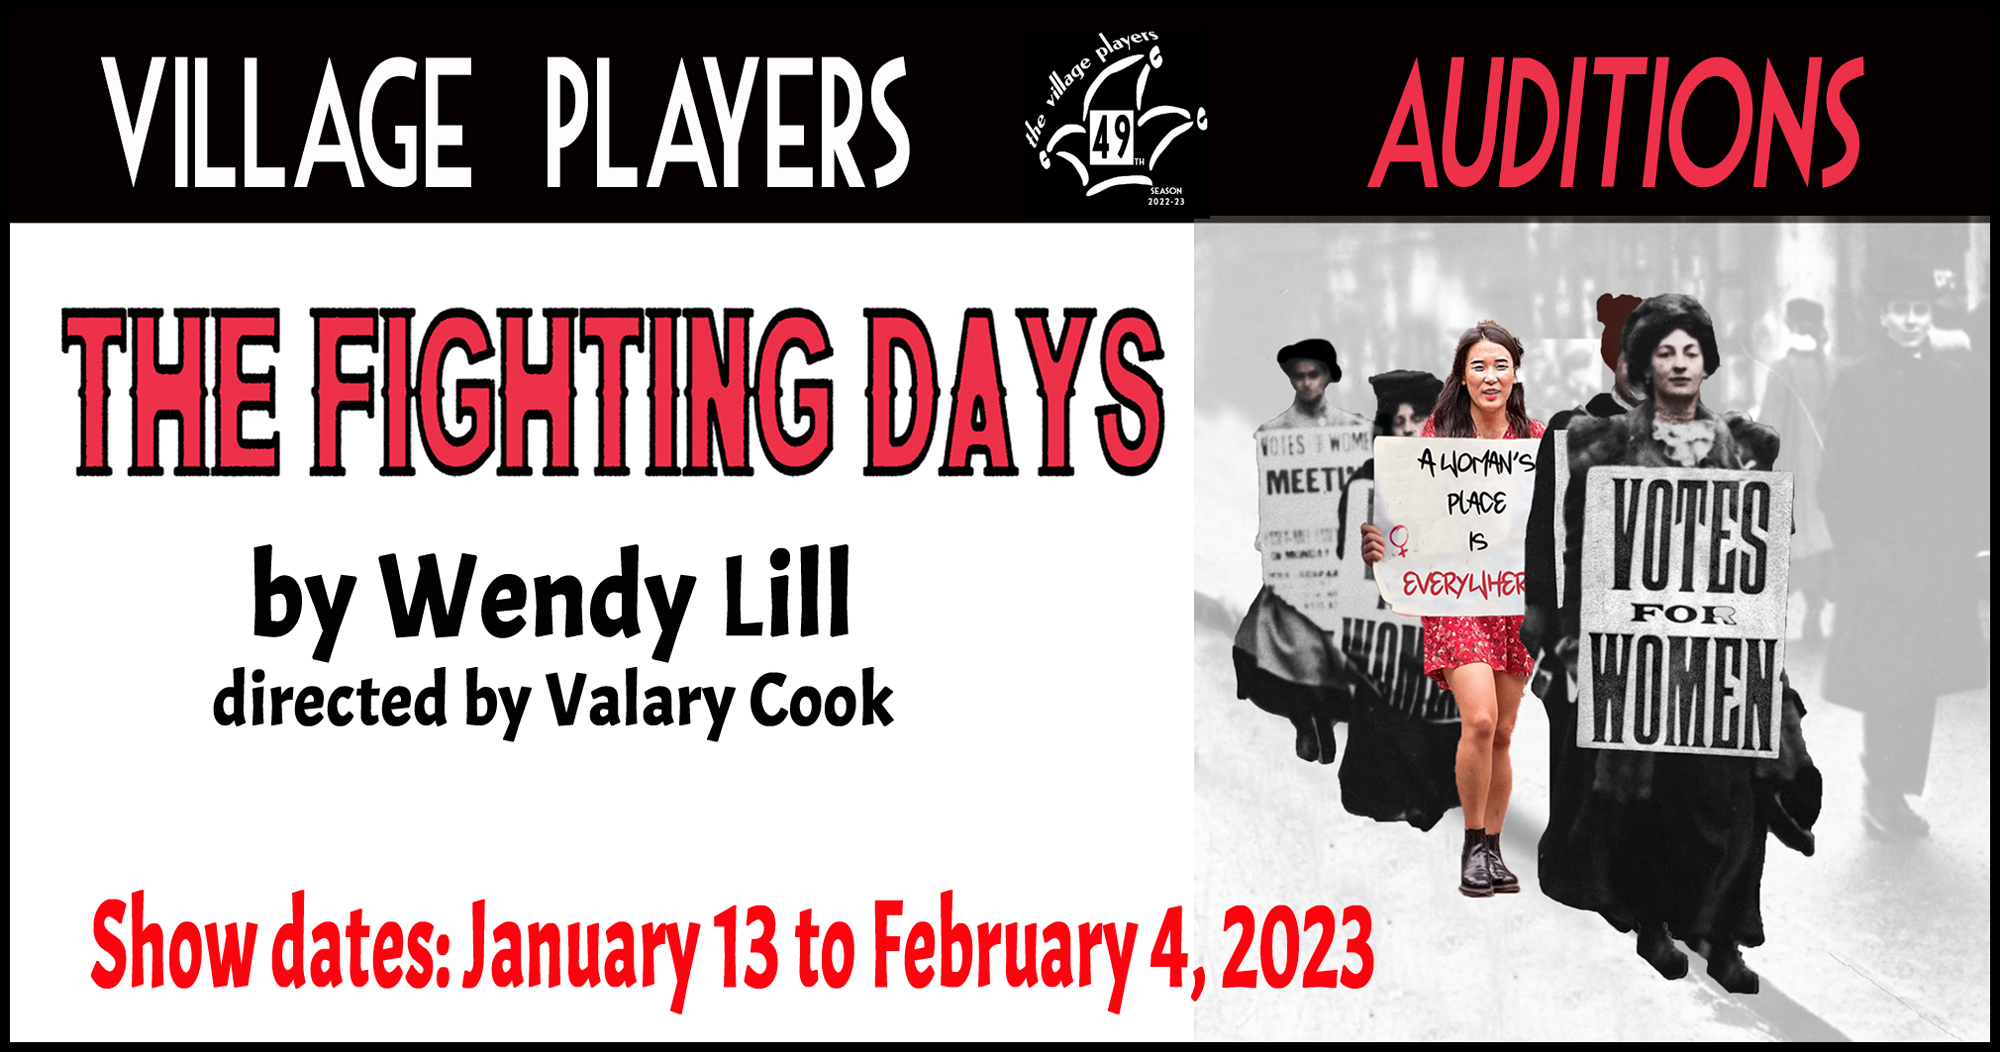 "Village Players" "Bloor West Village Players" "Village Playhouse" "Runnymede theatre" theatre theater "community theatre" "The Fighting Days" "Wendy Lill" "Valary Cook"